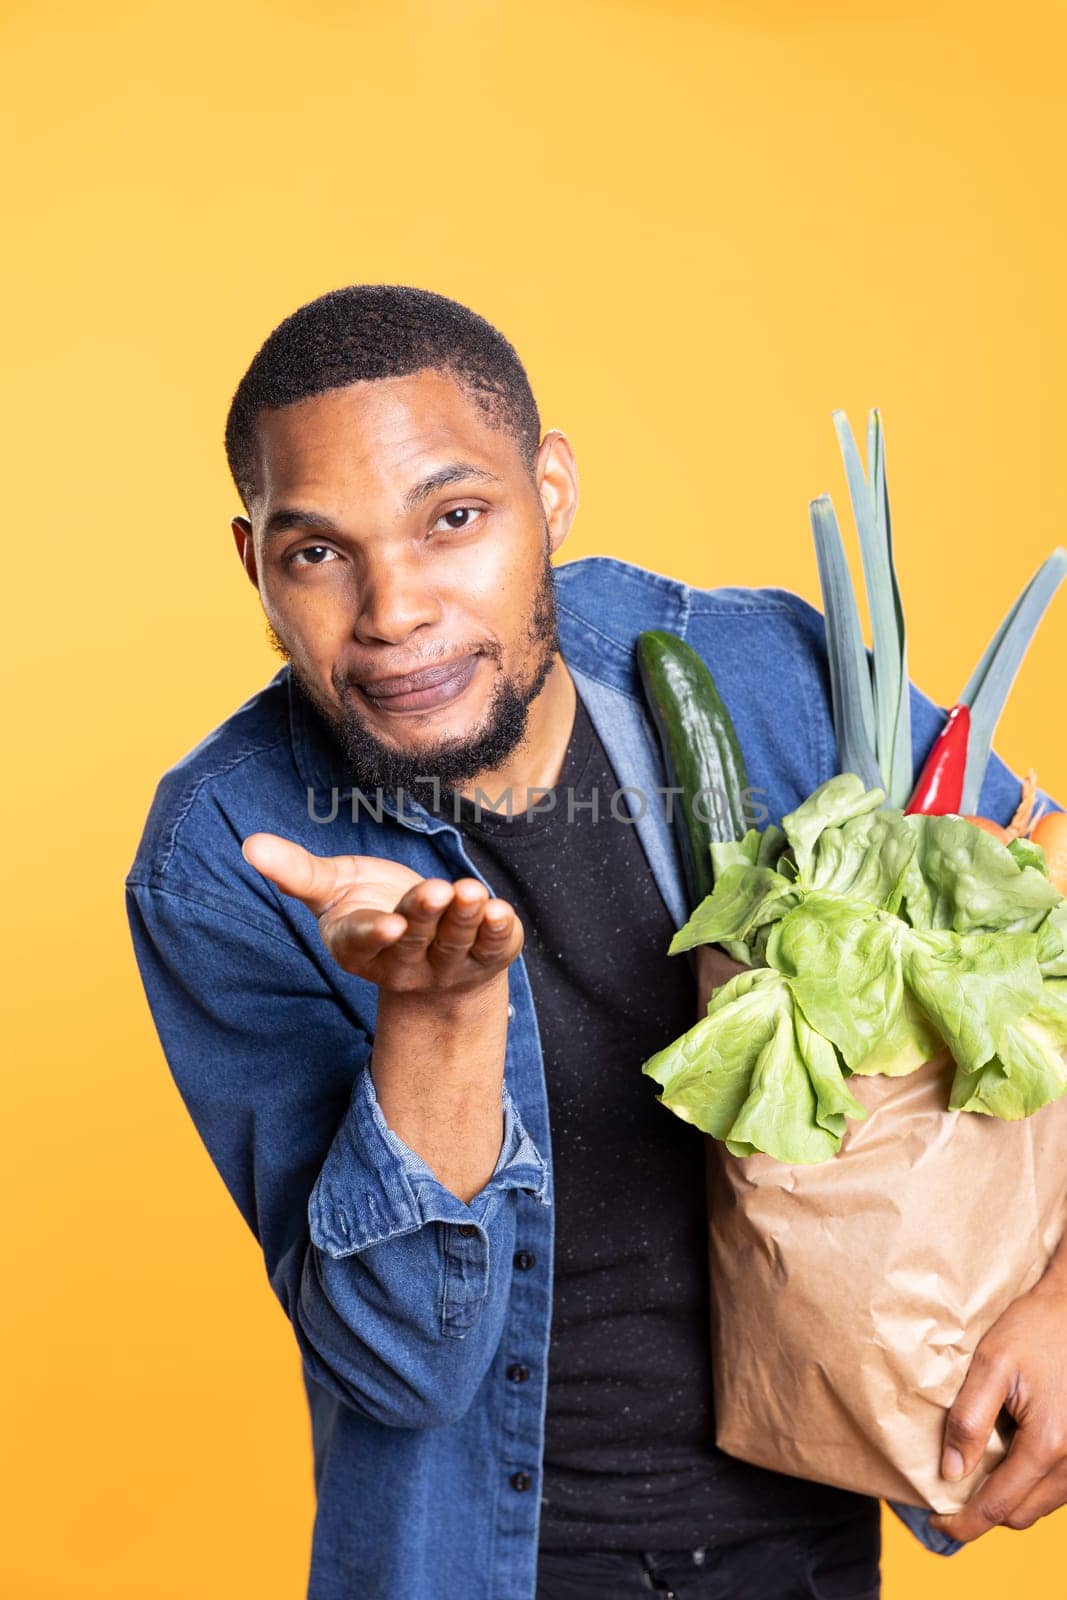 African american male model gives air kisses against yellow background, shopping for food at a local supermarket. Charismatic person supports zero waste with ethically sourced goods.